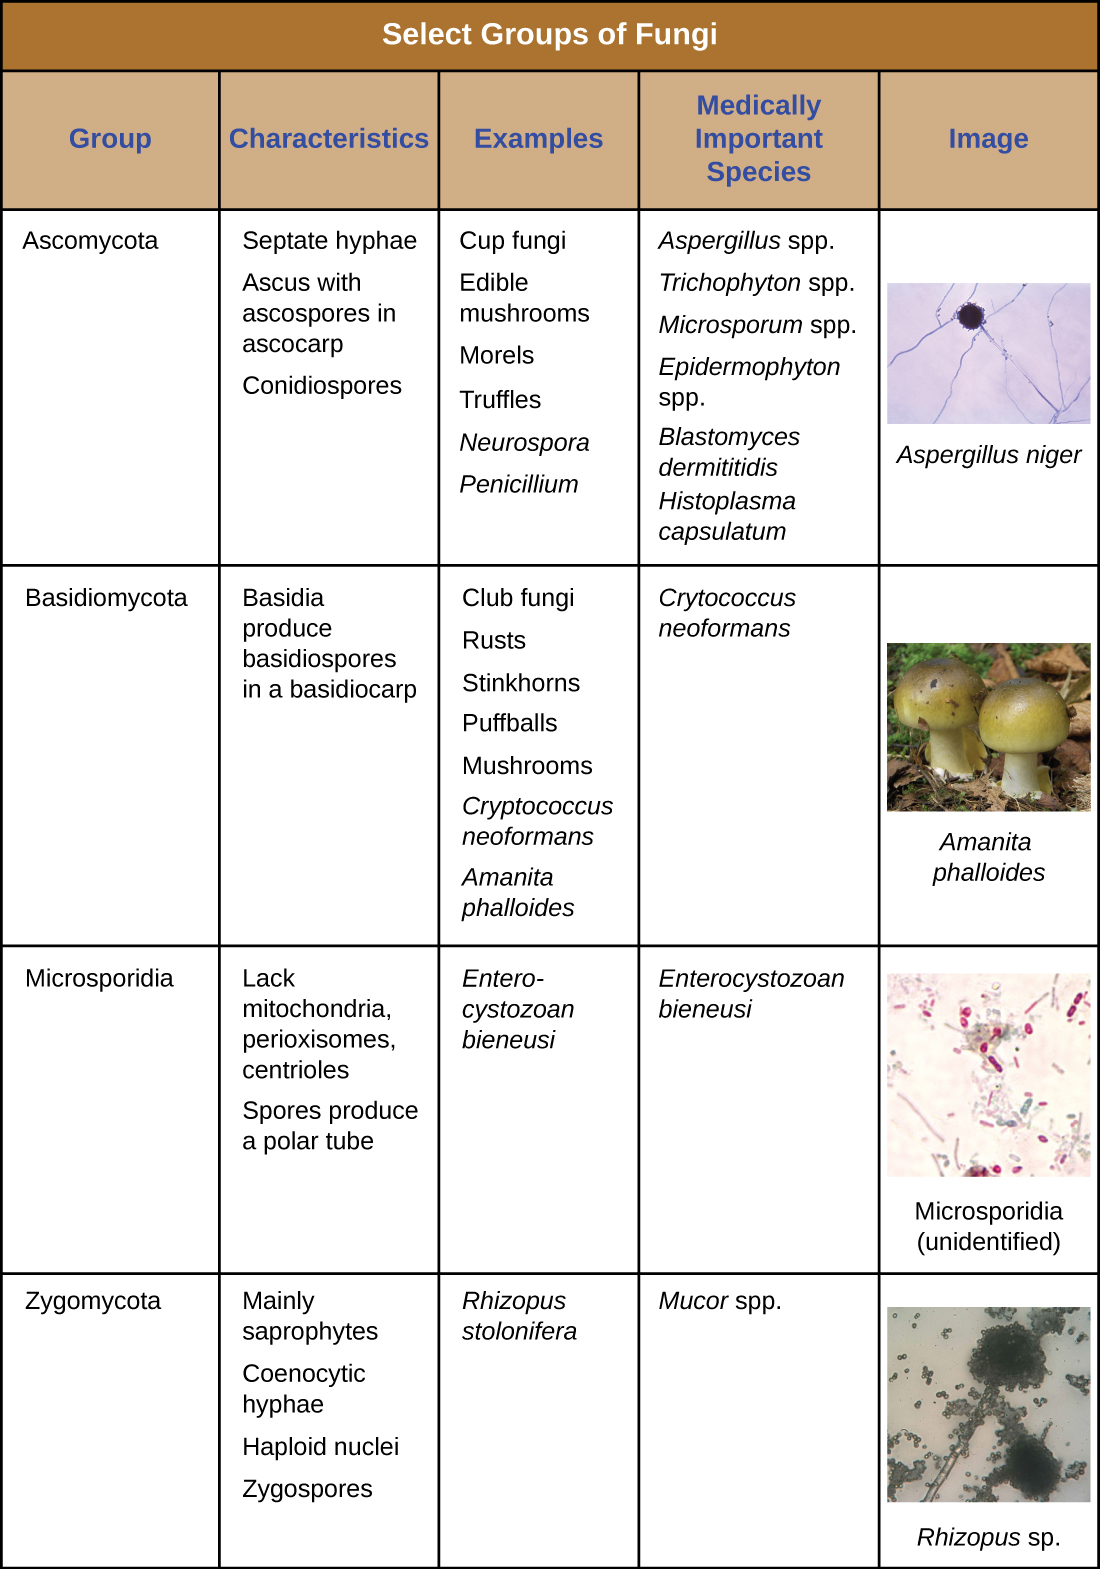 A table labeled select groups of fungi. Four groups are discussed. Ascomycota have the characteristics: septate hyphae, ascus with ascospores in ascocarp, and conidiospores. Examples include Cup fungi, edible mushrooms, morels, truffles, neurospora, and penicillim. Medically important species include Aspergillus, Trichophyton, Microsporum, Epidemophyton, Blastomyces demititidis, and Histoplasma capsulatum. An image of Aspergillus niger shows long strands with a dark sphere at the end of one strand. Basidiomycota have the characteristics: basidia, produce basidiospores in basidiocarp. Examples include club fungi, rusts, stinkhors, puffballs, mushrooms, Cryptococcus neoformans, Amanita phalloides. Medically important species include Cryptococcus neoformans. An image shows a mushroom labeled Amanita phalloides. Microsporidia have the characteristics: lack mitochondria, peroxisomes, and centrioles; spores produce a polar tube. Examples include Enterocystozoan bieneusi which is medically important. A micrograph shows oval cells labeled microsporidia (unidentified). Zygomycota have the characteristics: mainly saprophytes, coenocytic hyphae, haploid nuclei and zygospores. Examples include Rhizopus stolonifera and the medically important mucor spp. A micrograph shows a long strand with many small dots everywhere on the slide.